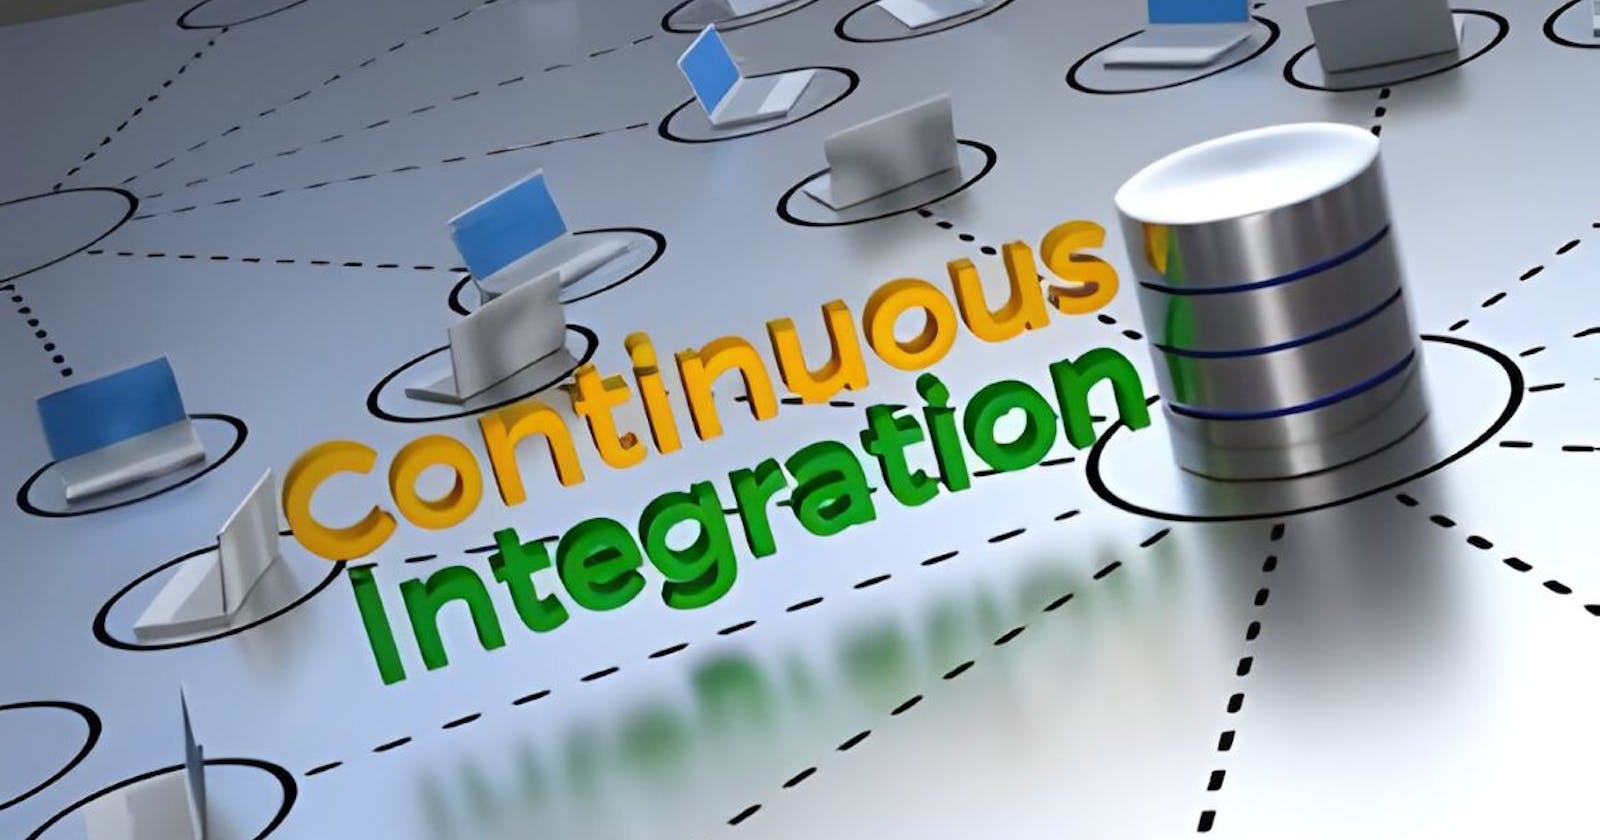 Continuous Integration: A Better Way to Build Software